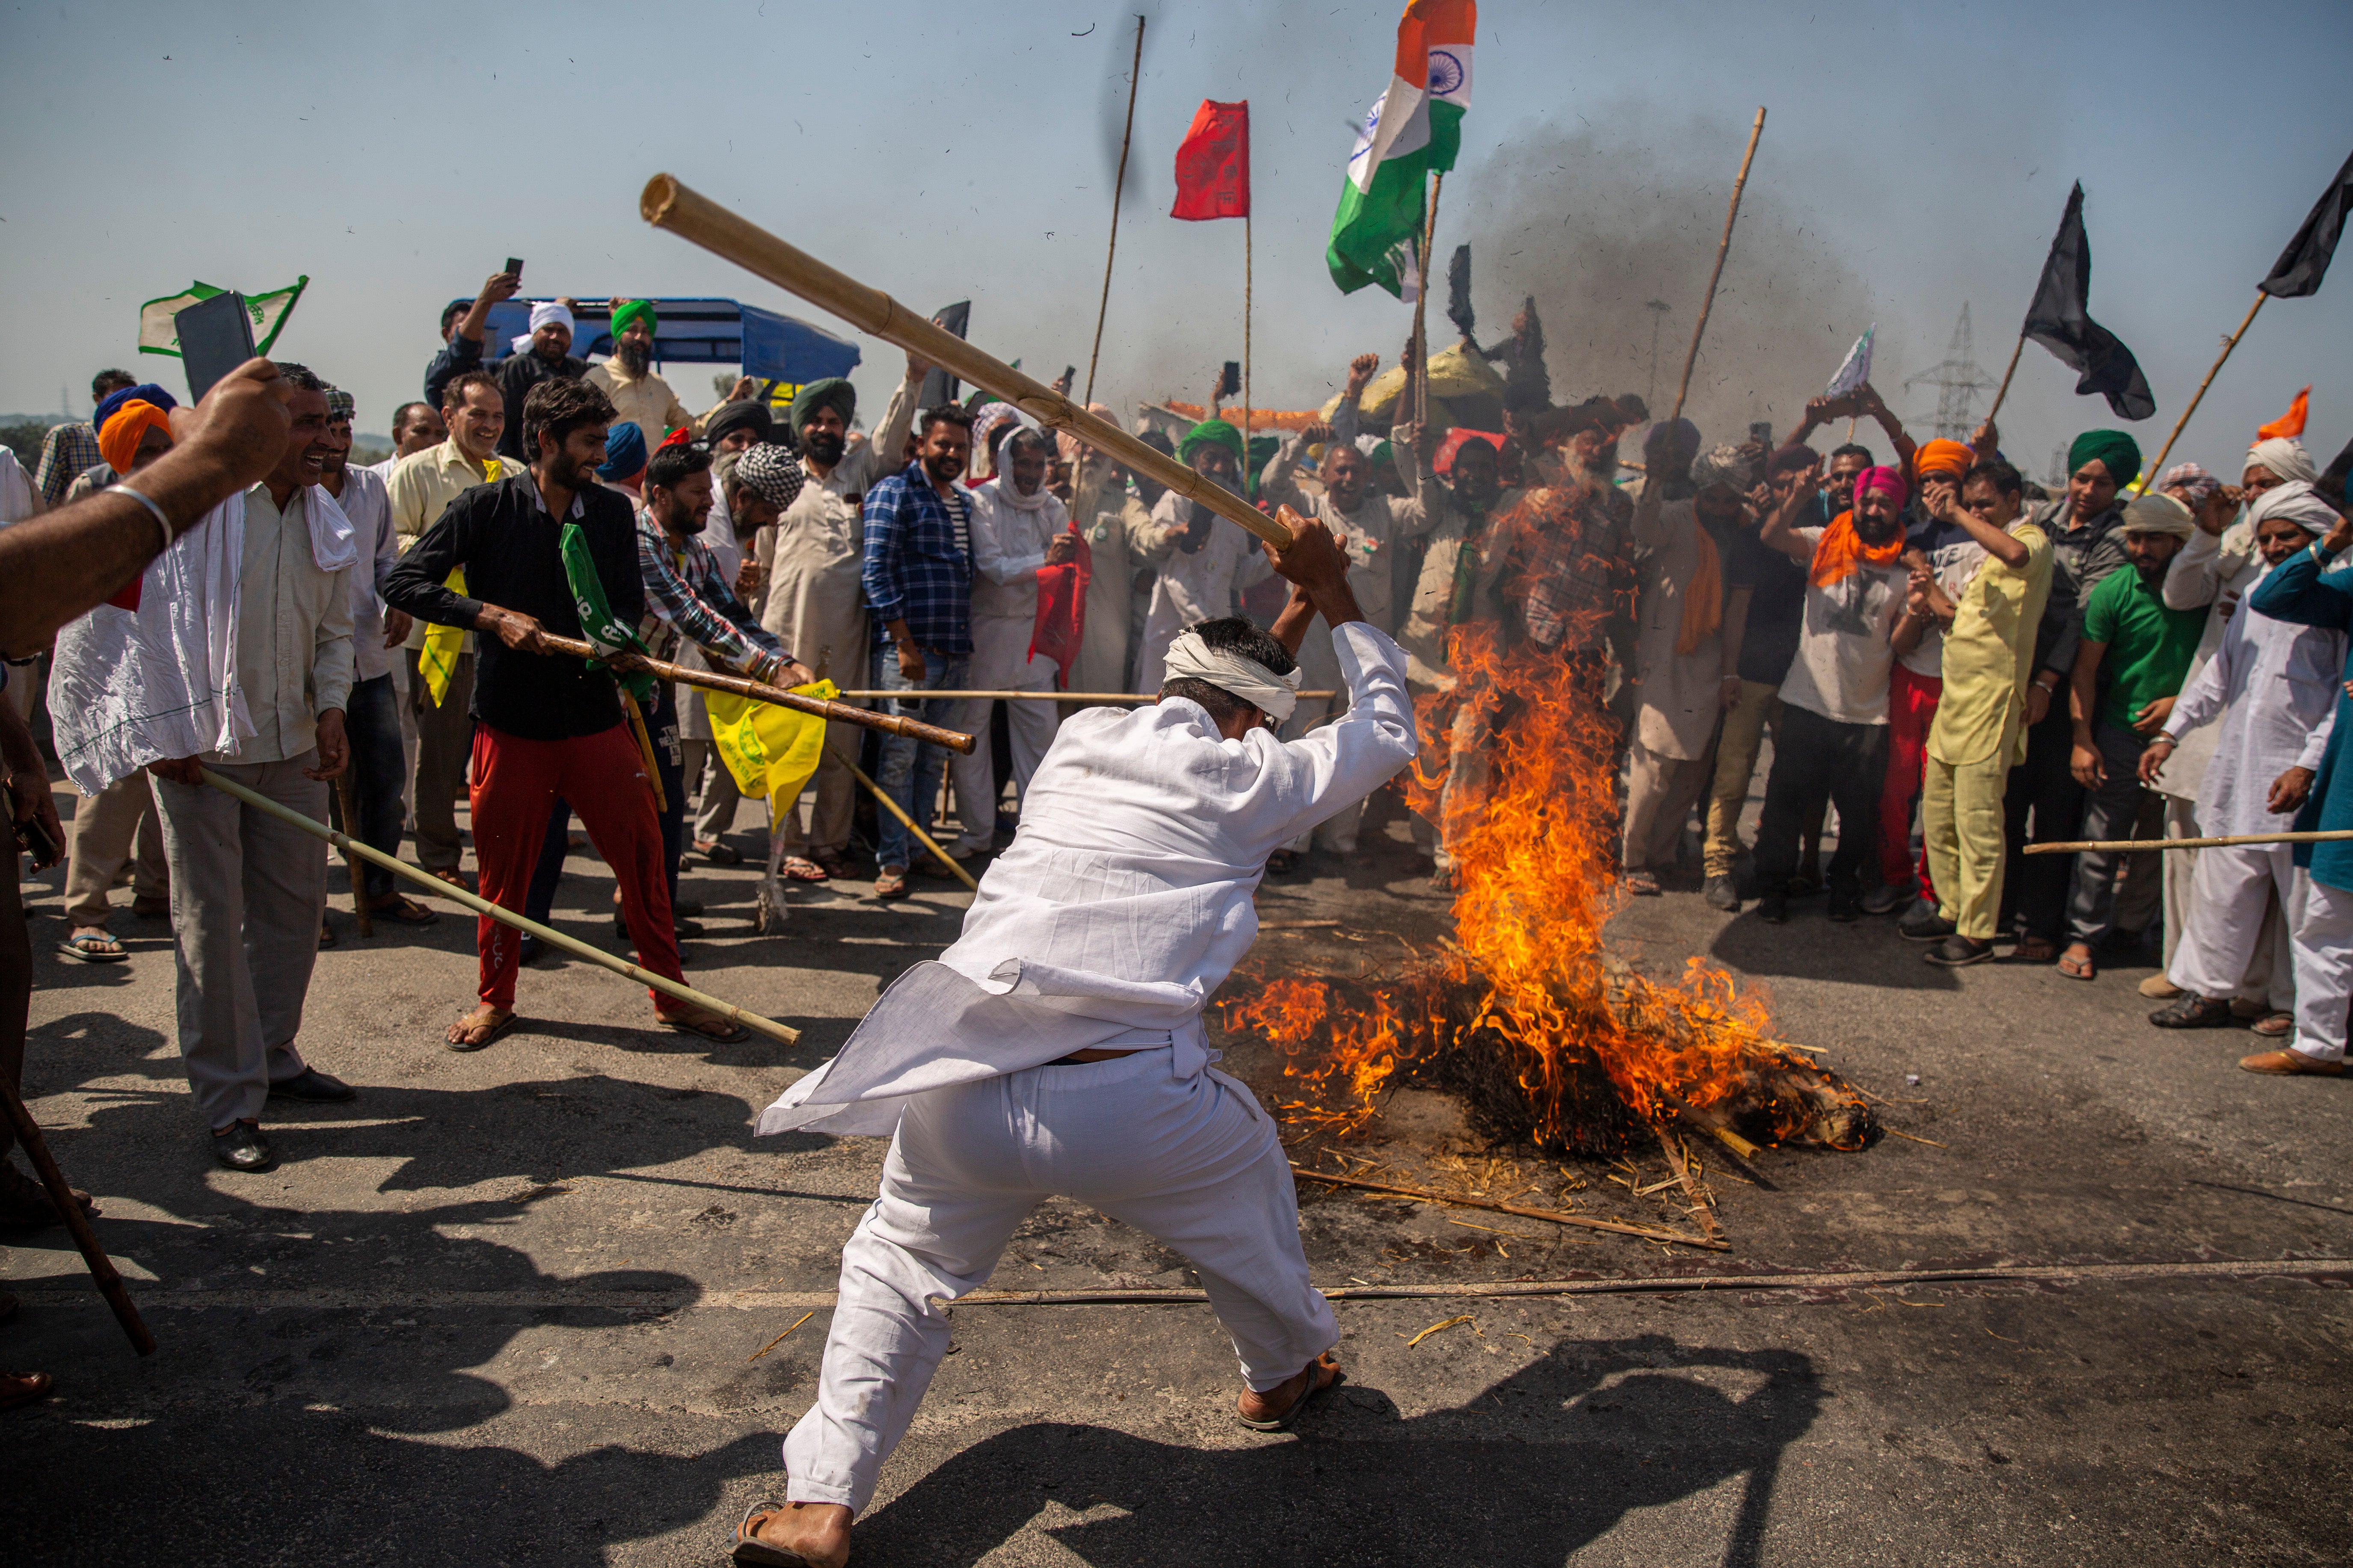 Indian farmers beat a burning mock corpse representing Indian prime minister Narendra Modi on Saturday, marking 100 days of the protests against new farm laws